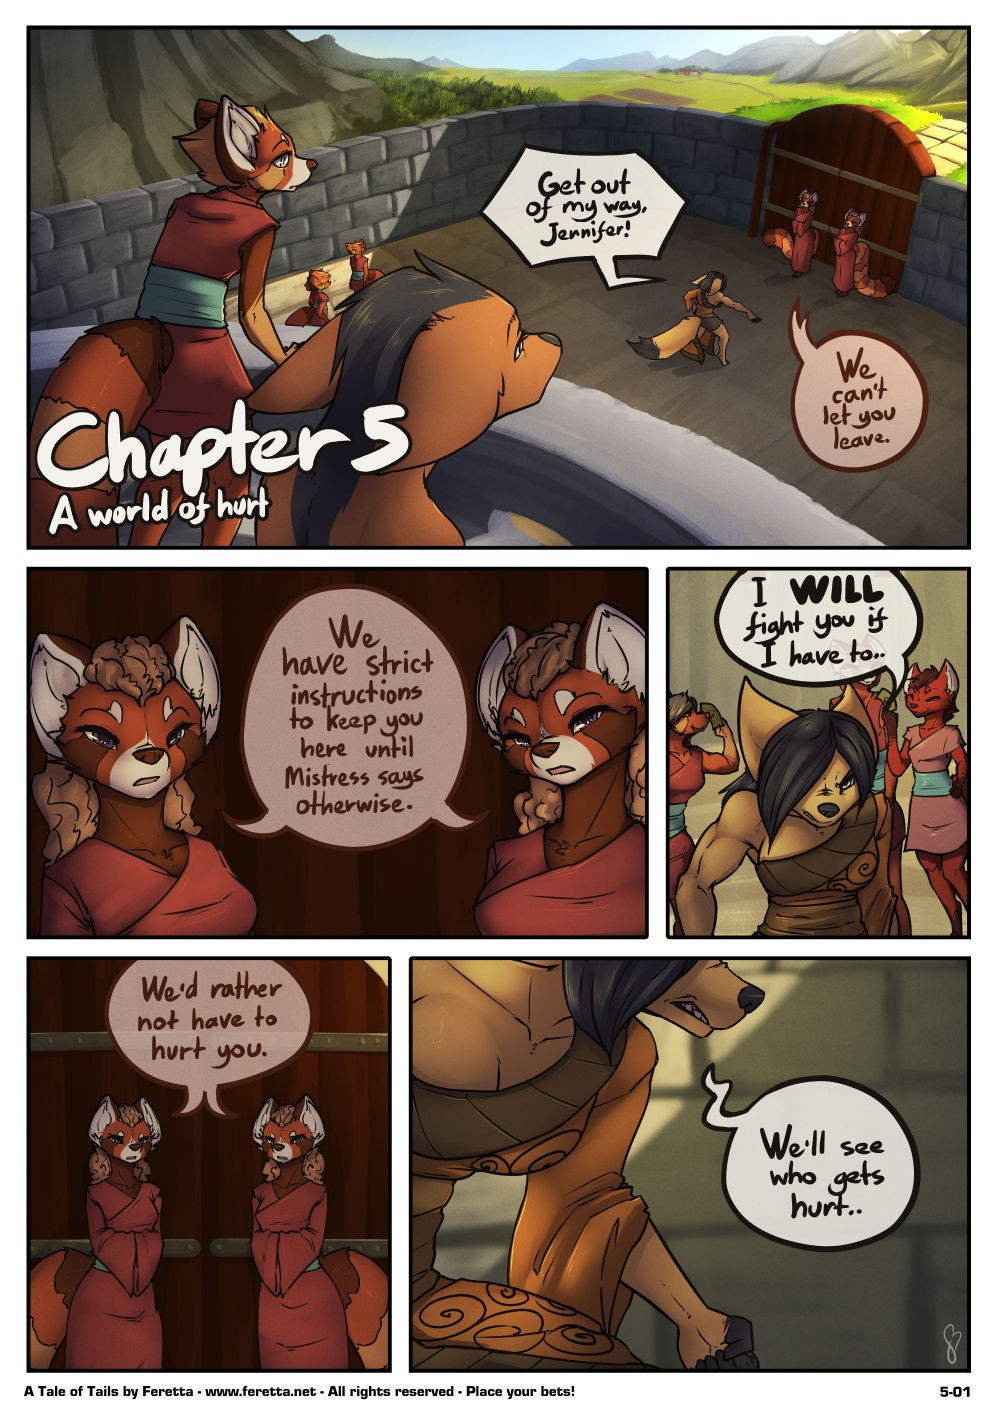 A Tale of Tails: Chapter 5 – A World of Hurt